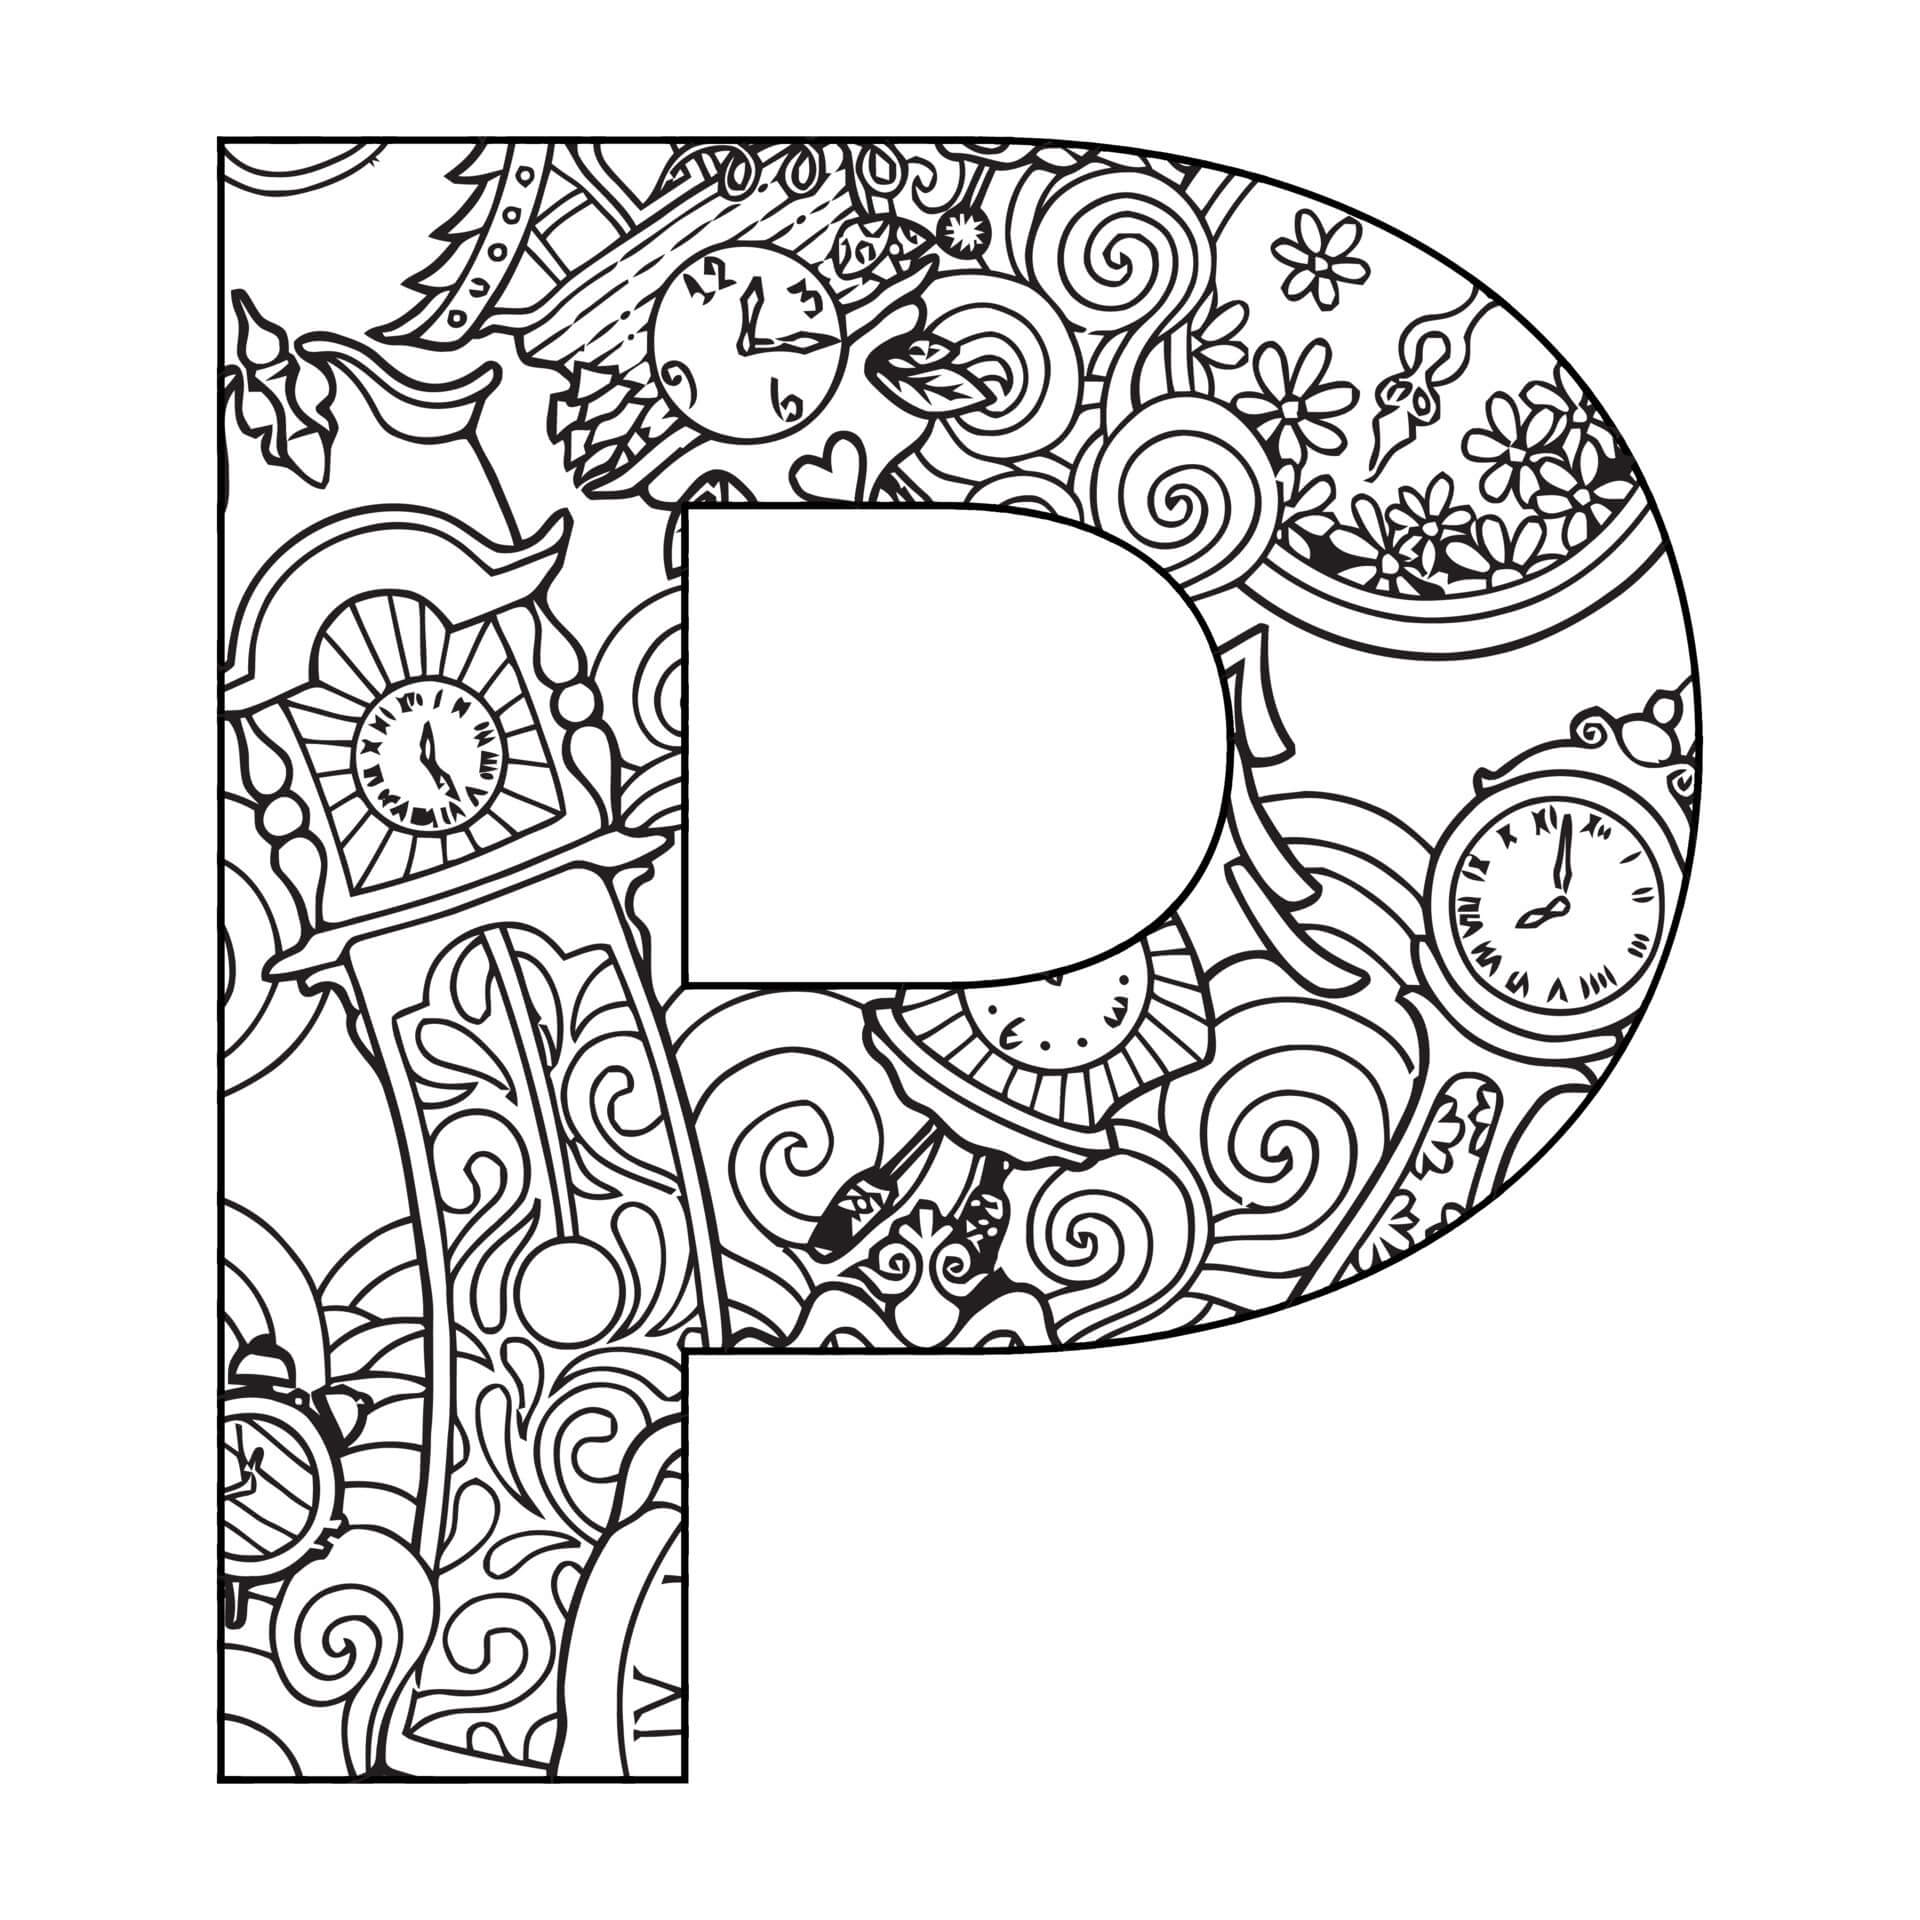 Mandala Letter A Coloring Page - Sheet 3 - Download, Print Now!